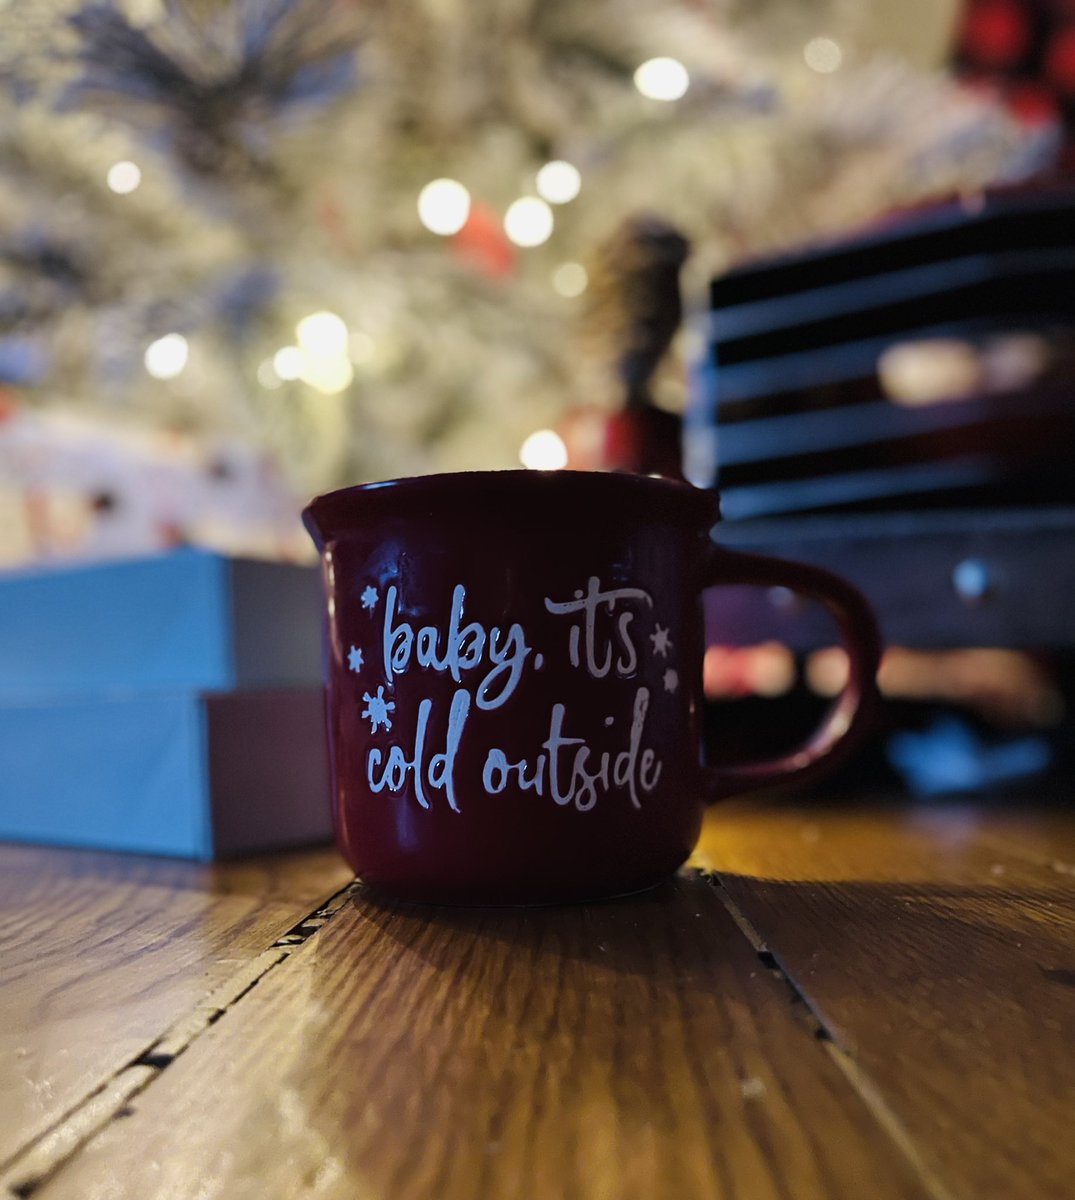 Merry Christmas my Twitter peeps!!! Have a blessed and safe Holiday filled with family, love , food and lots of memories made. #Butfirstcoffee #Christmas #blessed #family #memories #takethepictures #cold #NCjeepgirl #jeepmafia #Lyndajenkinsphotography #photosbyLyndaFaye